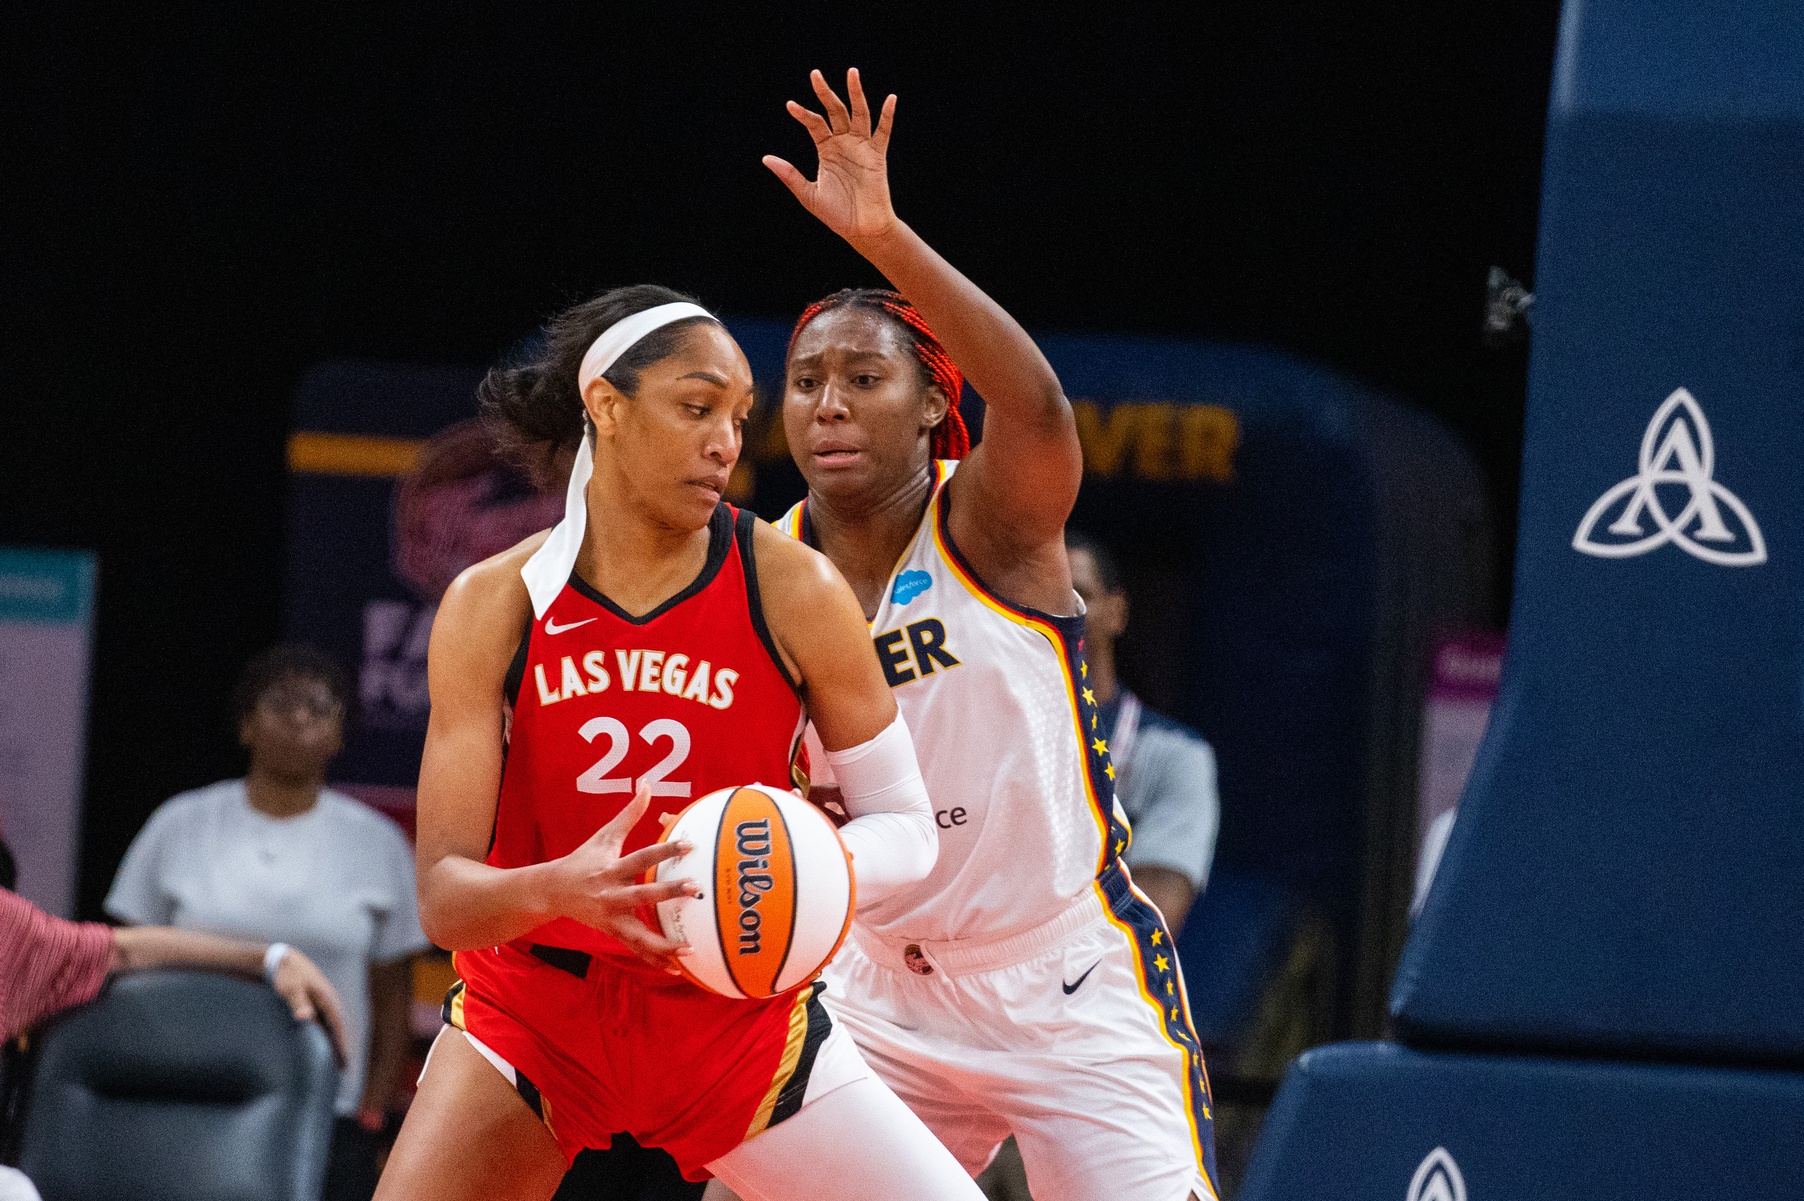 Jun 4, 2023; Indianapolis, Indiana, USA; Las Vegas Aces forward A'ja Wilson (22) shoots the ball while Indiana Fever center Aliyah Boston (7) defends in the first half at Gainbridge Fieldhouse. Mandatory Credit: Trevor Ruszkowski-USA TODAY Sports